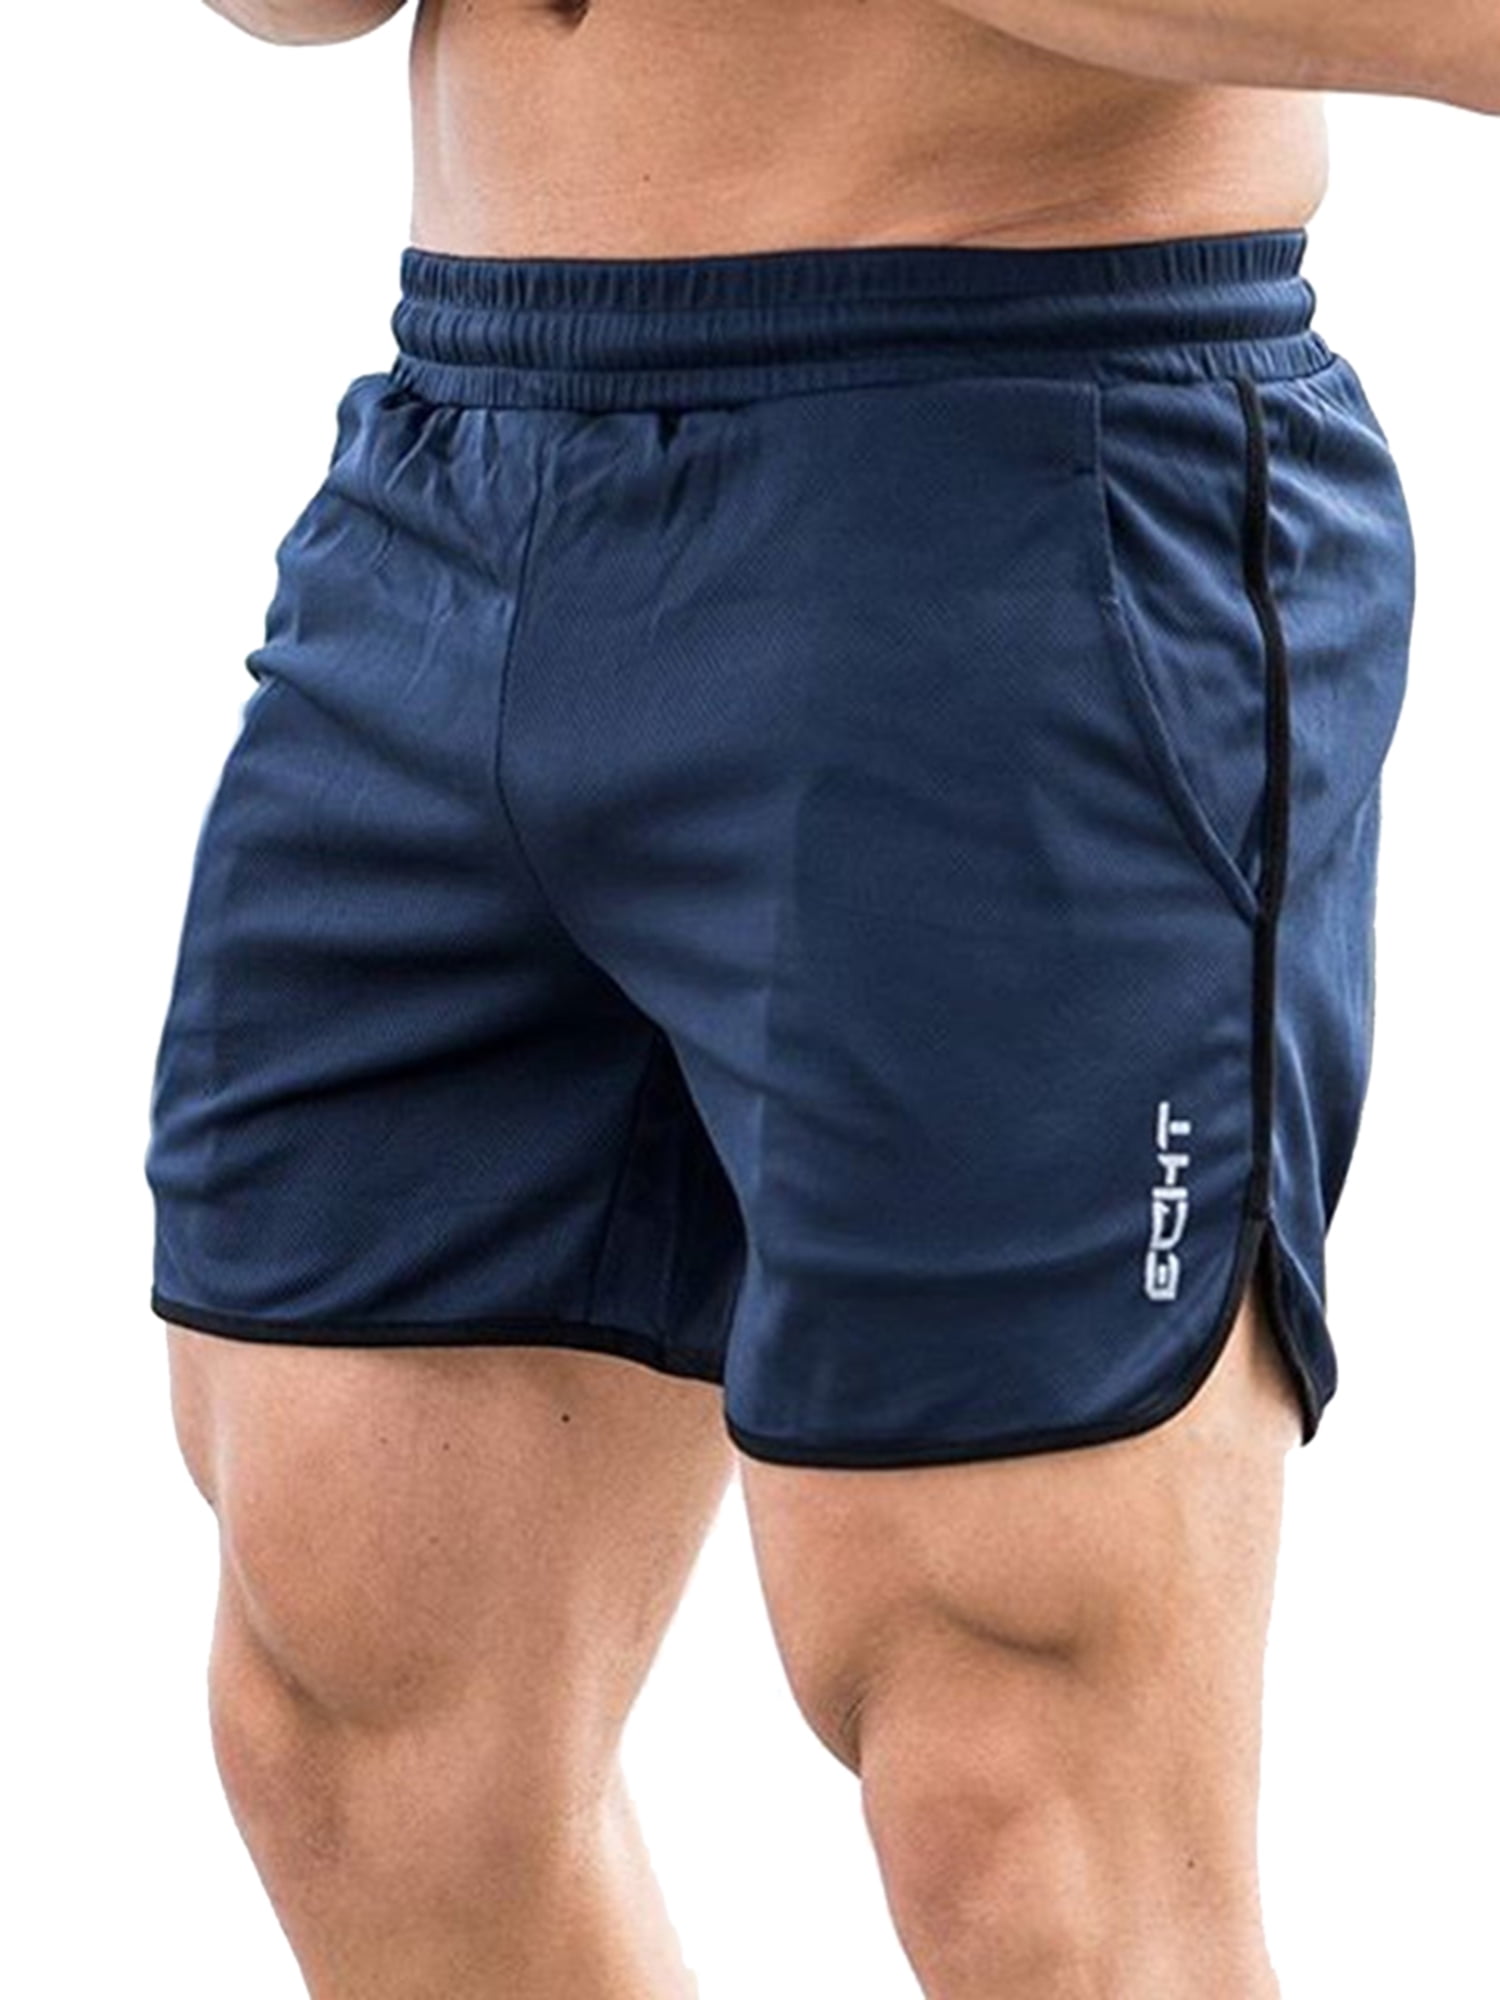 ZCAITIANYA Mens Summer Beach Shorts Gym Workout Quick Dry Running Jogging Training Fitness Pants with Pocket